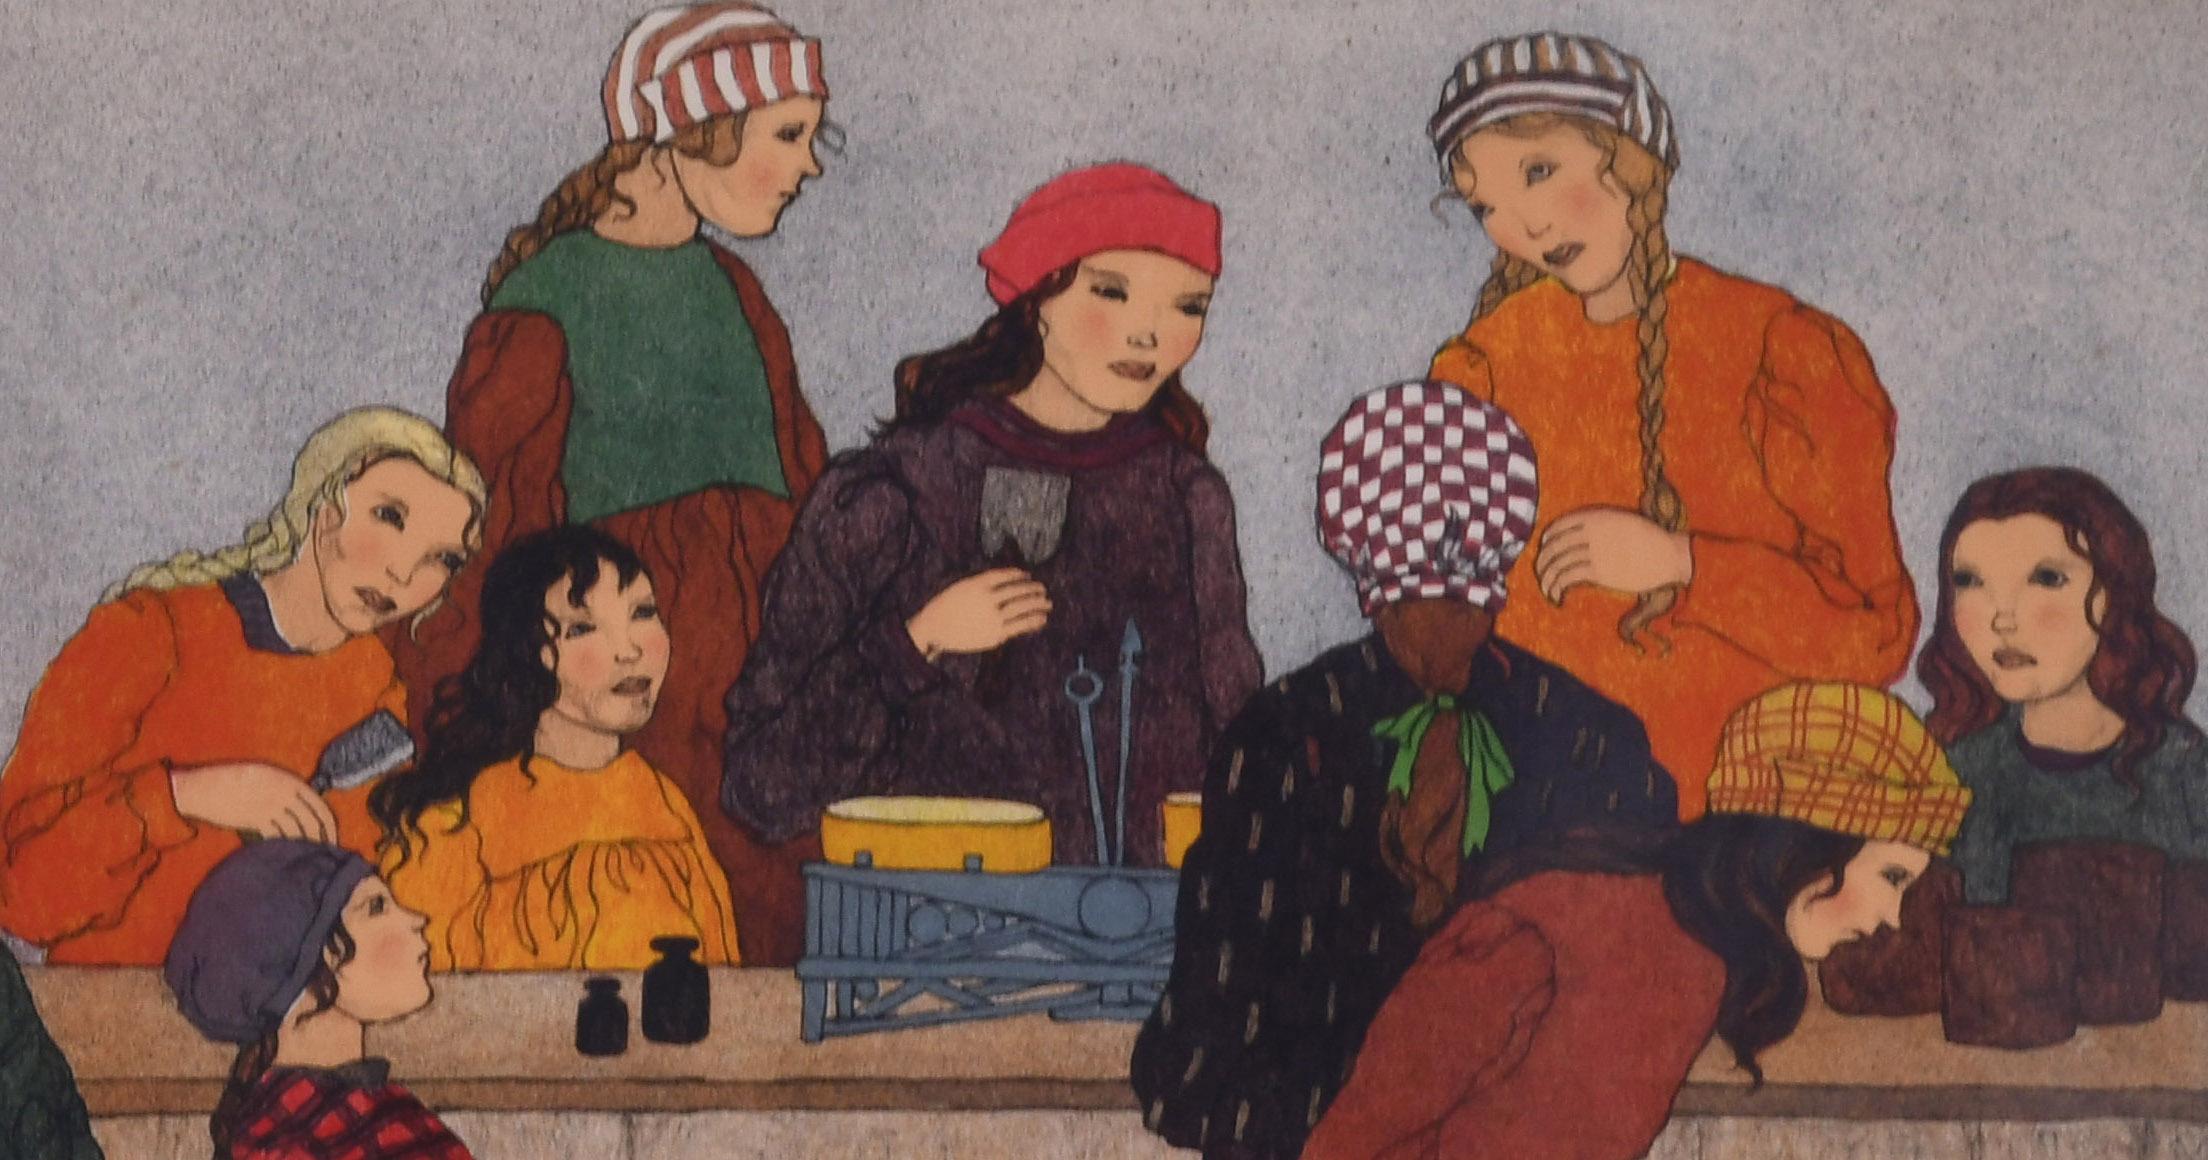 School Girls of Vienna Packing Rations from England and America for the Children - Jugendstil Print by Stephanie Kraus